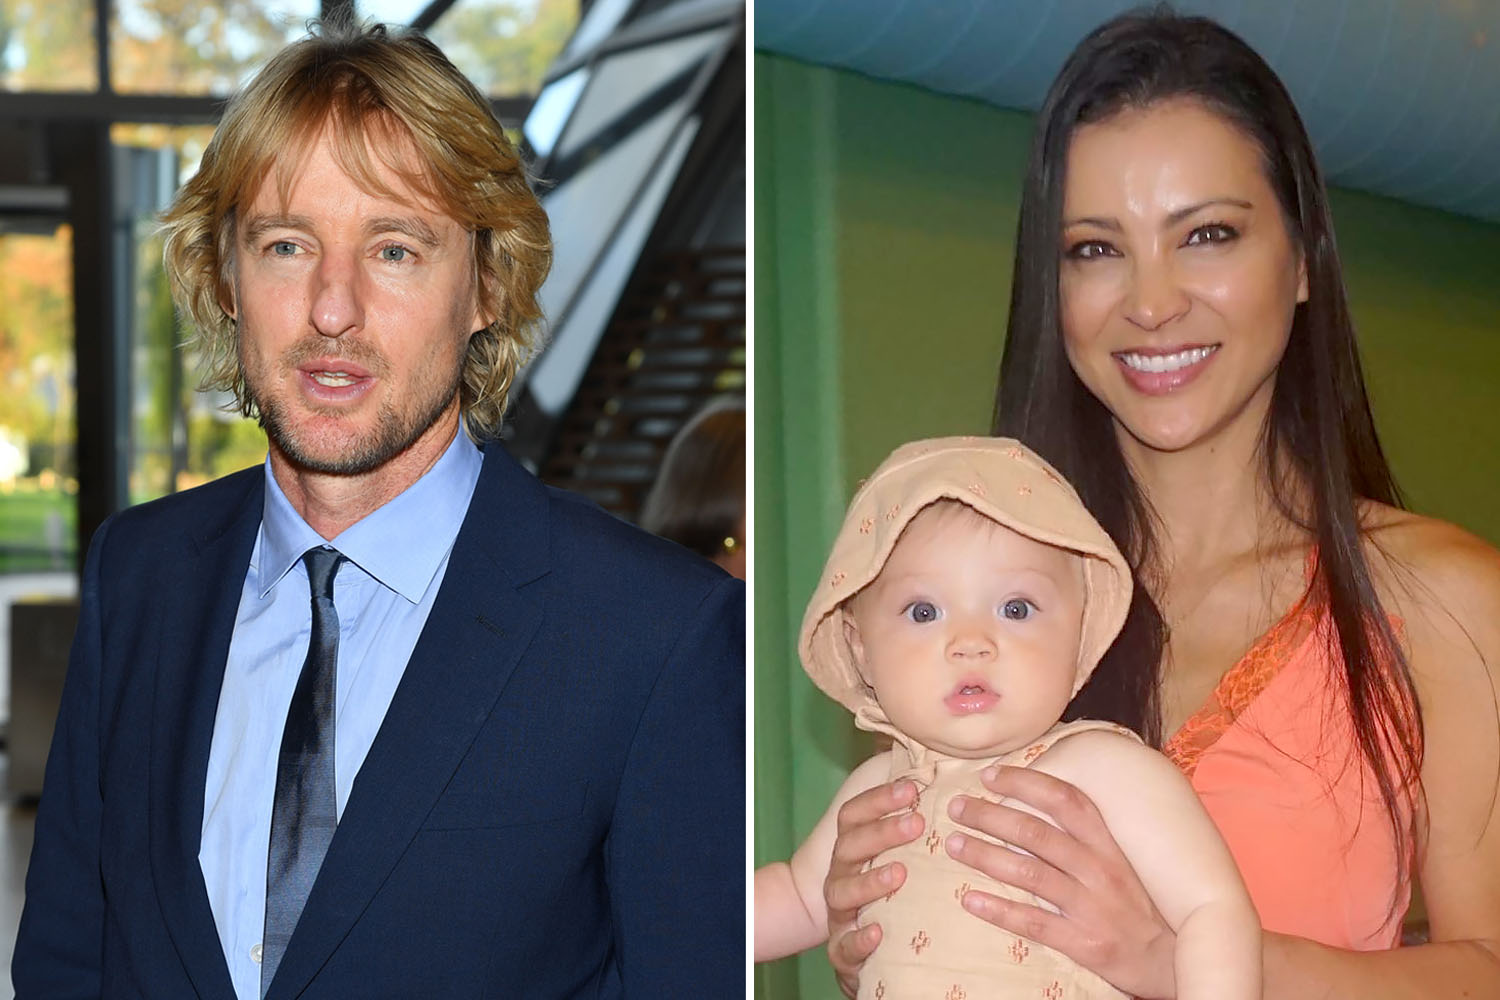 Owen Wilson snubs daughter Lyla, 2, in interview about being dad to